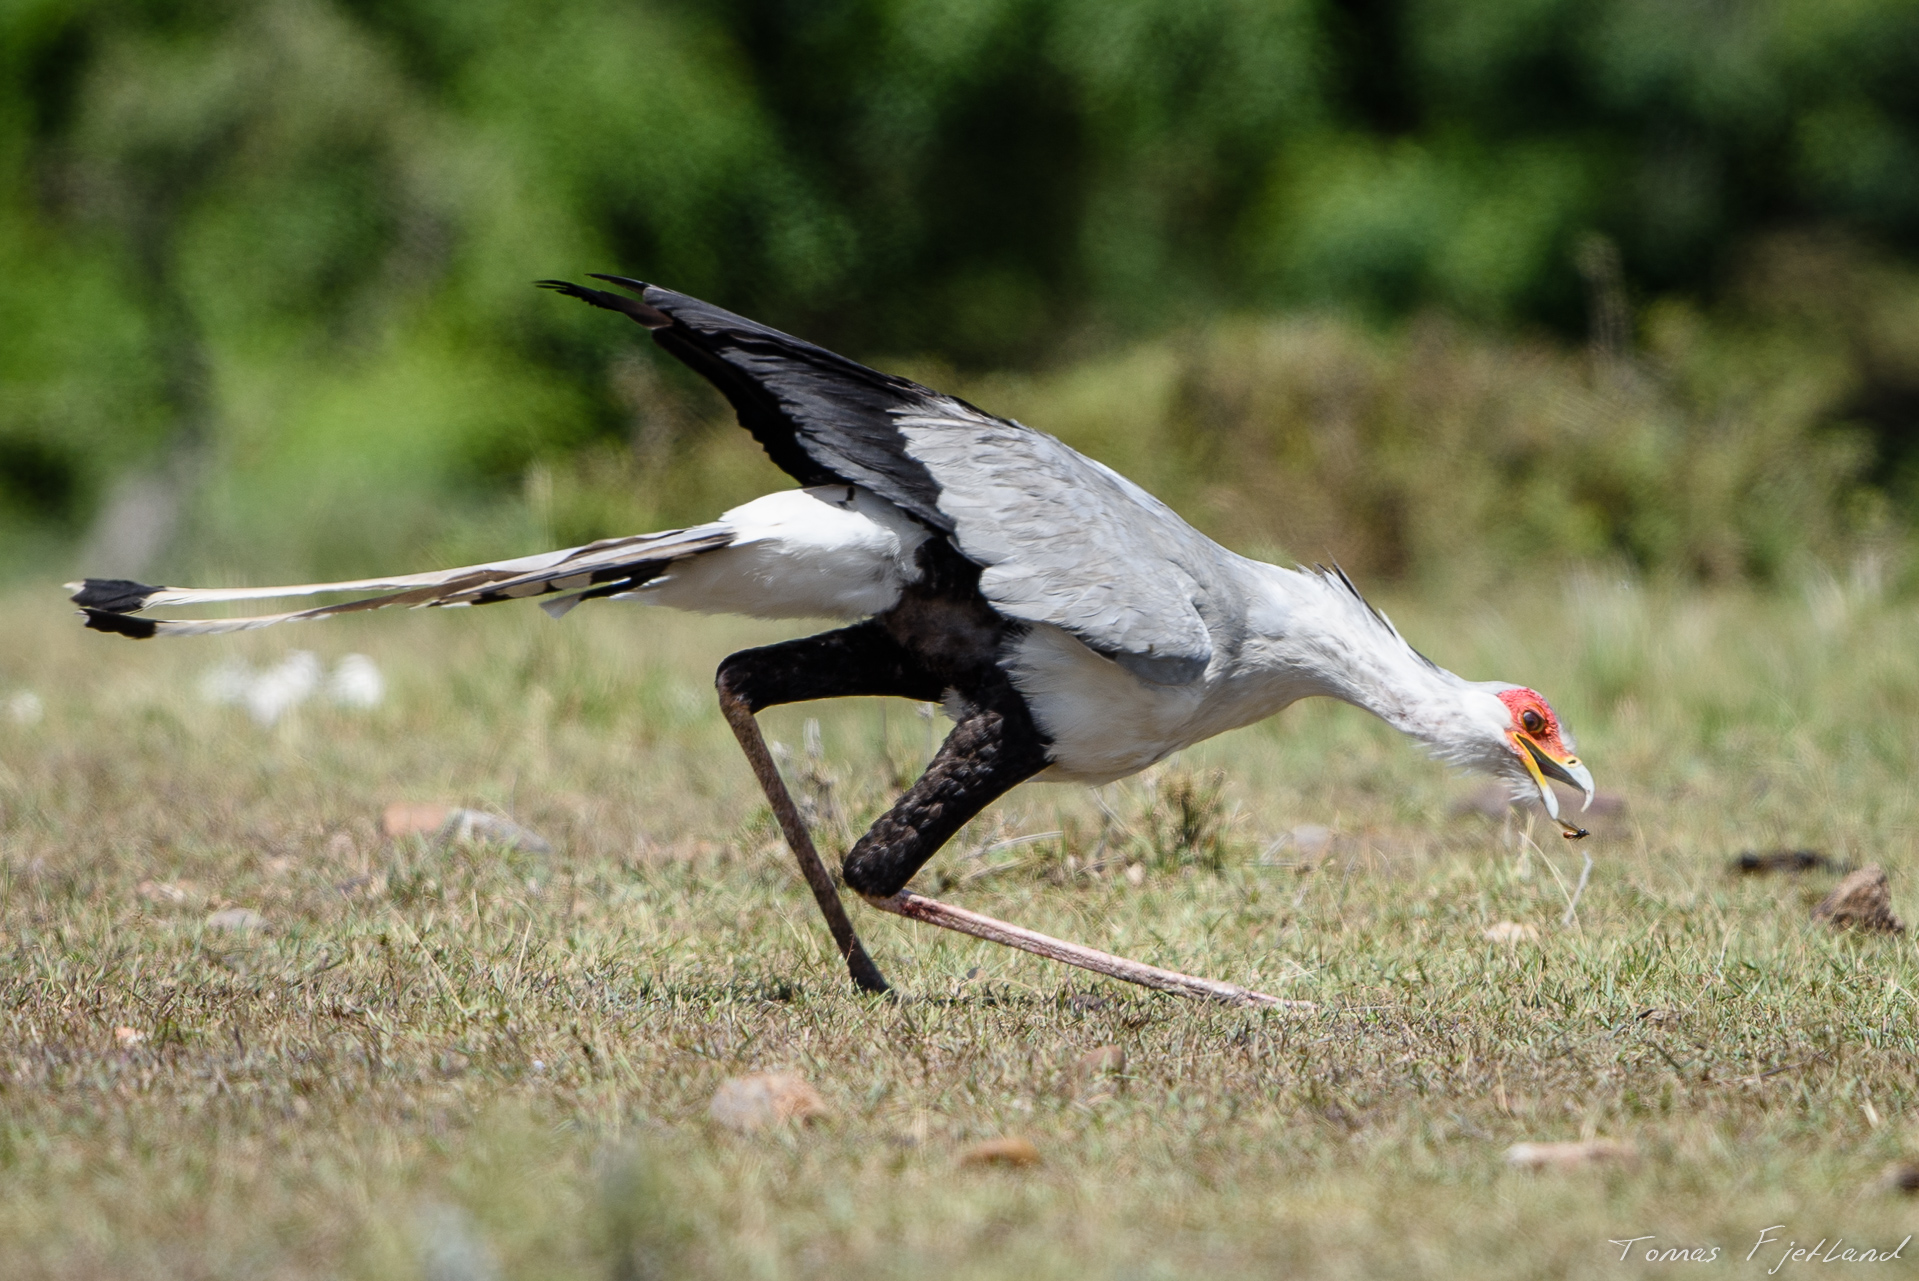 Just outside the Porini Lion camp on our way back for lunch, we saw this Secretary bird hunting wasps and other insects as well as reptiles